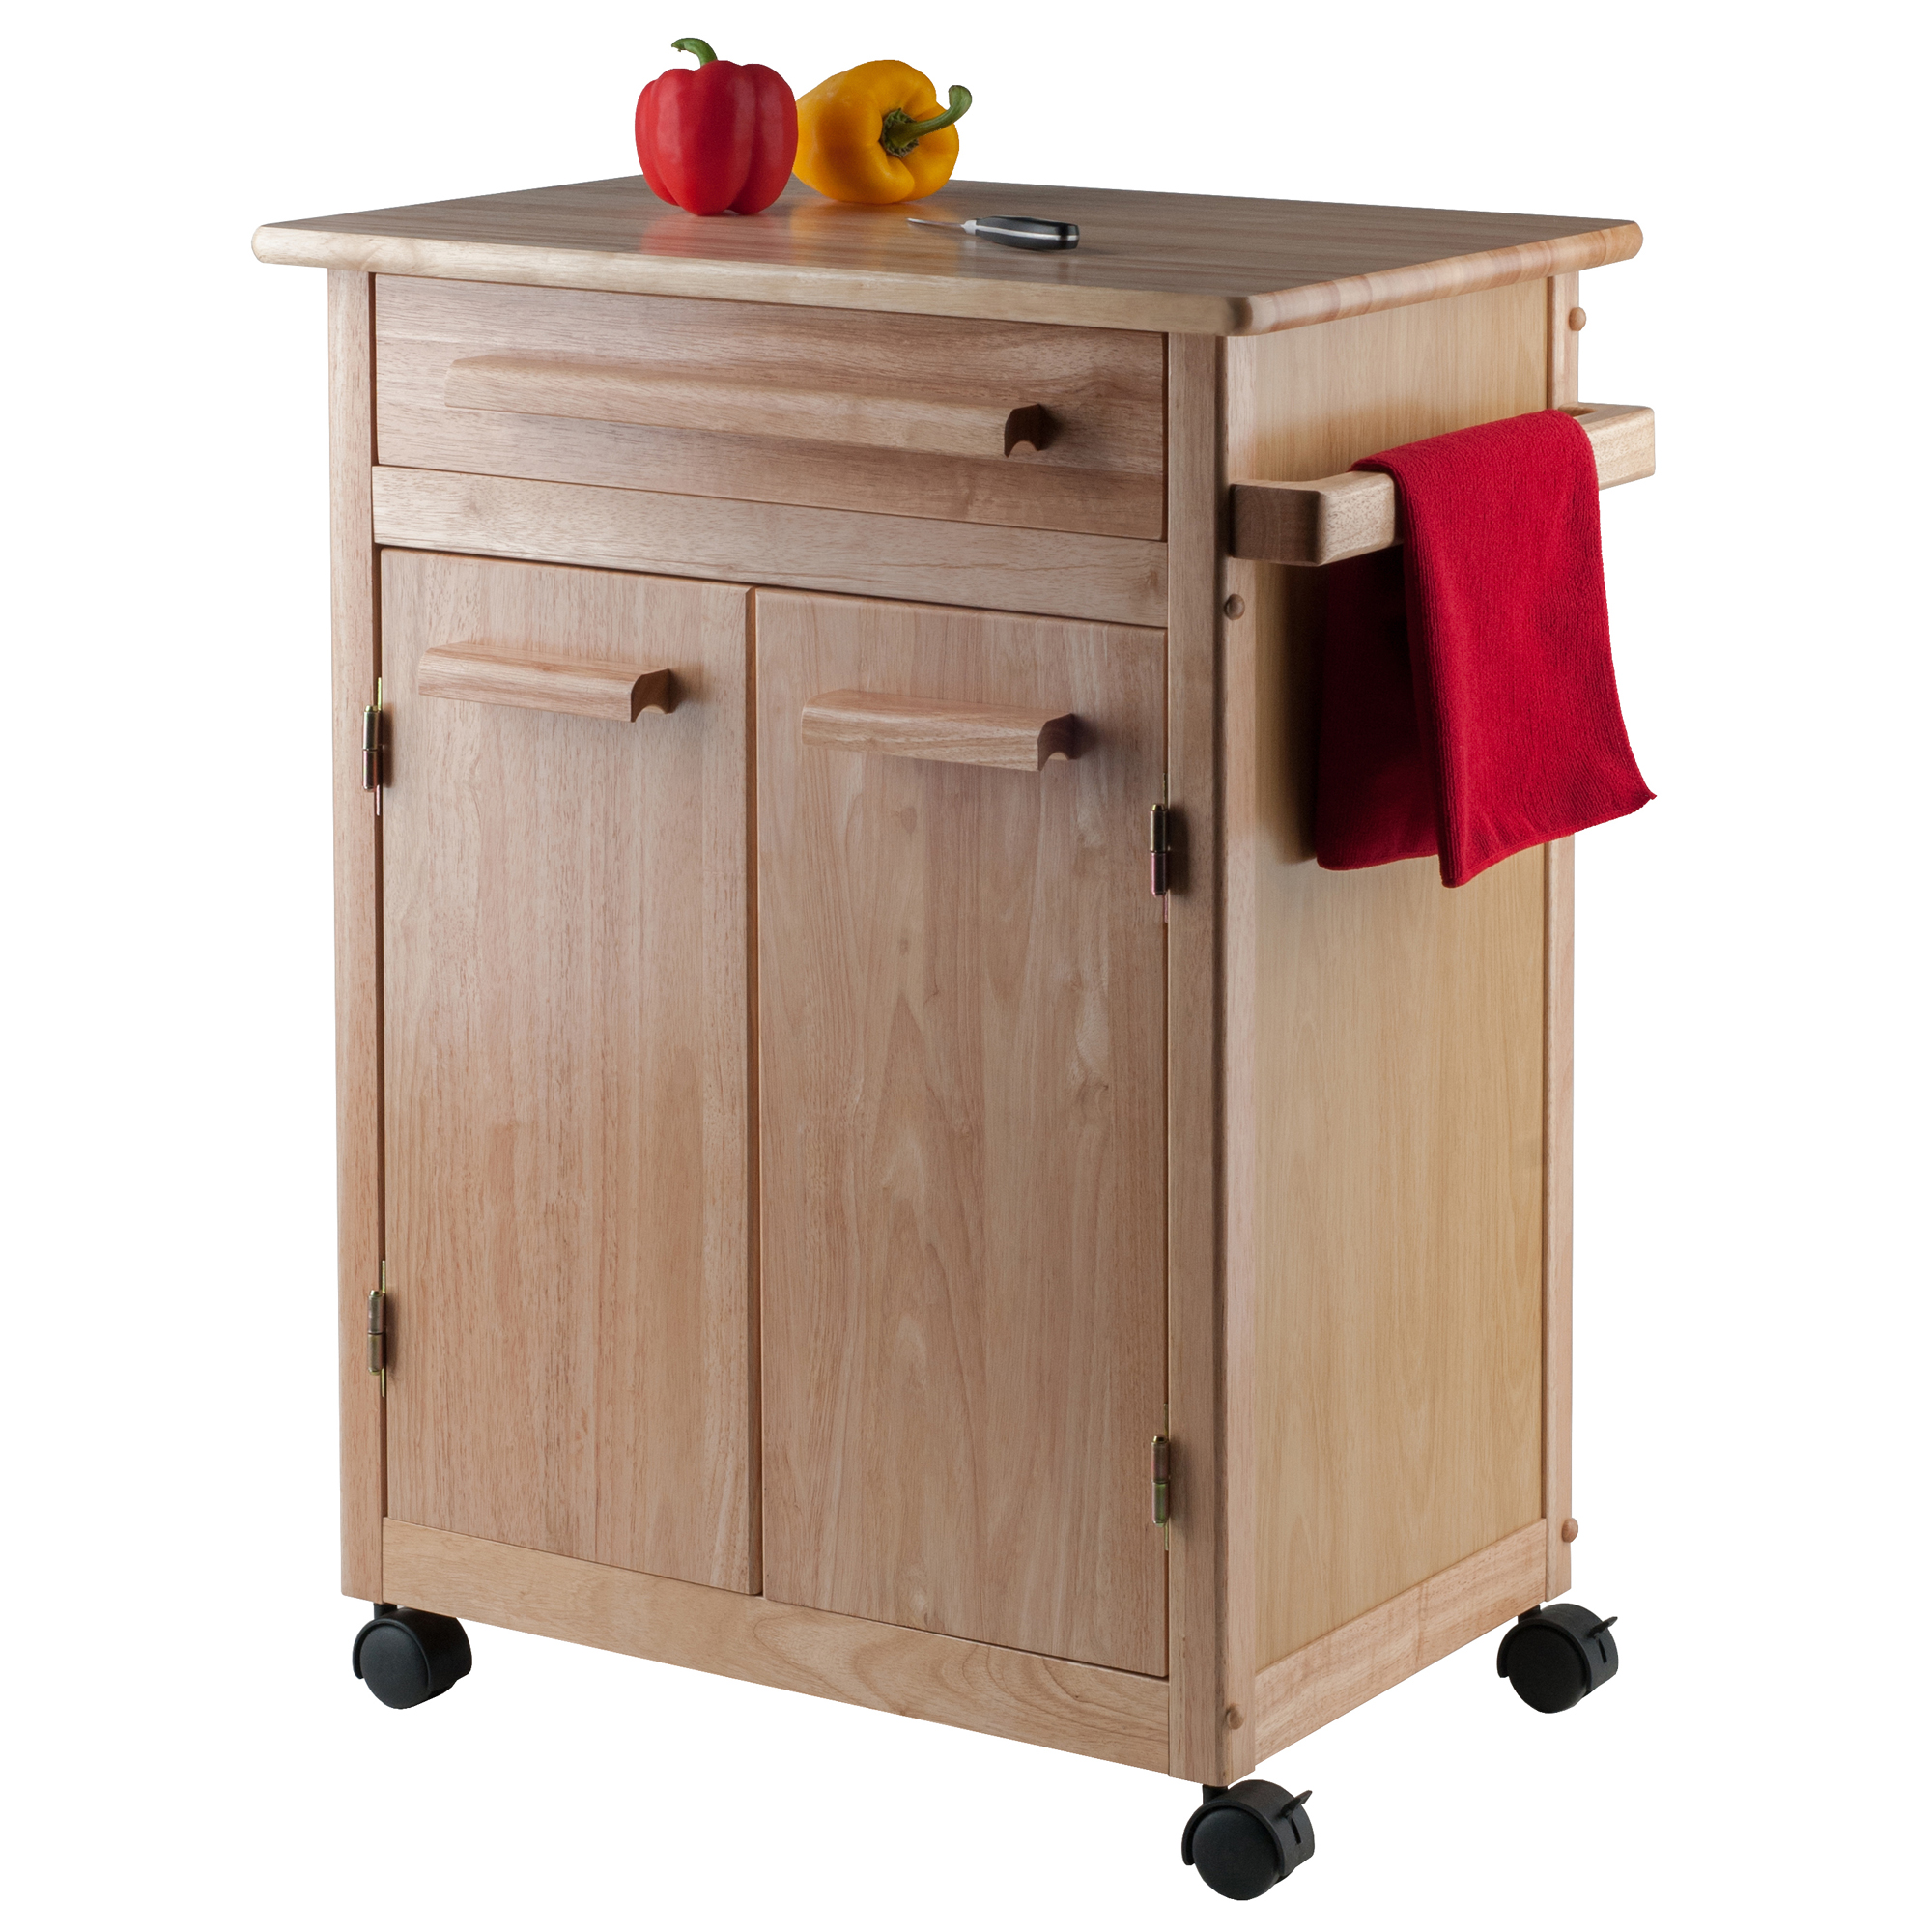 Winsome Wood Hackett Kitchen Utility Cart, Natural Finish - image 2 of 11